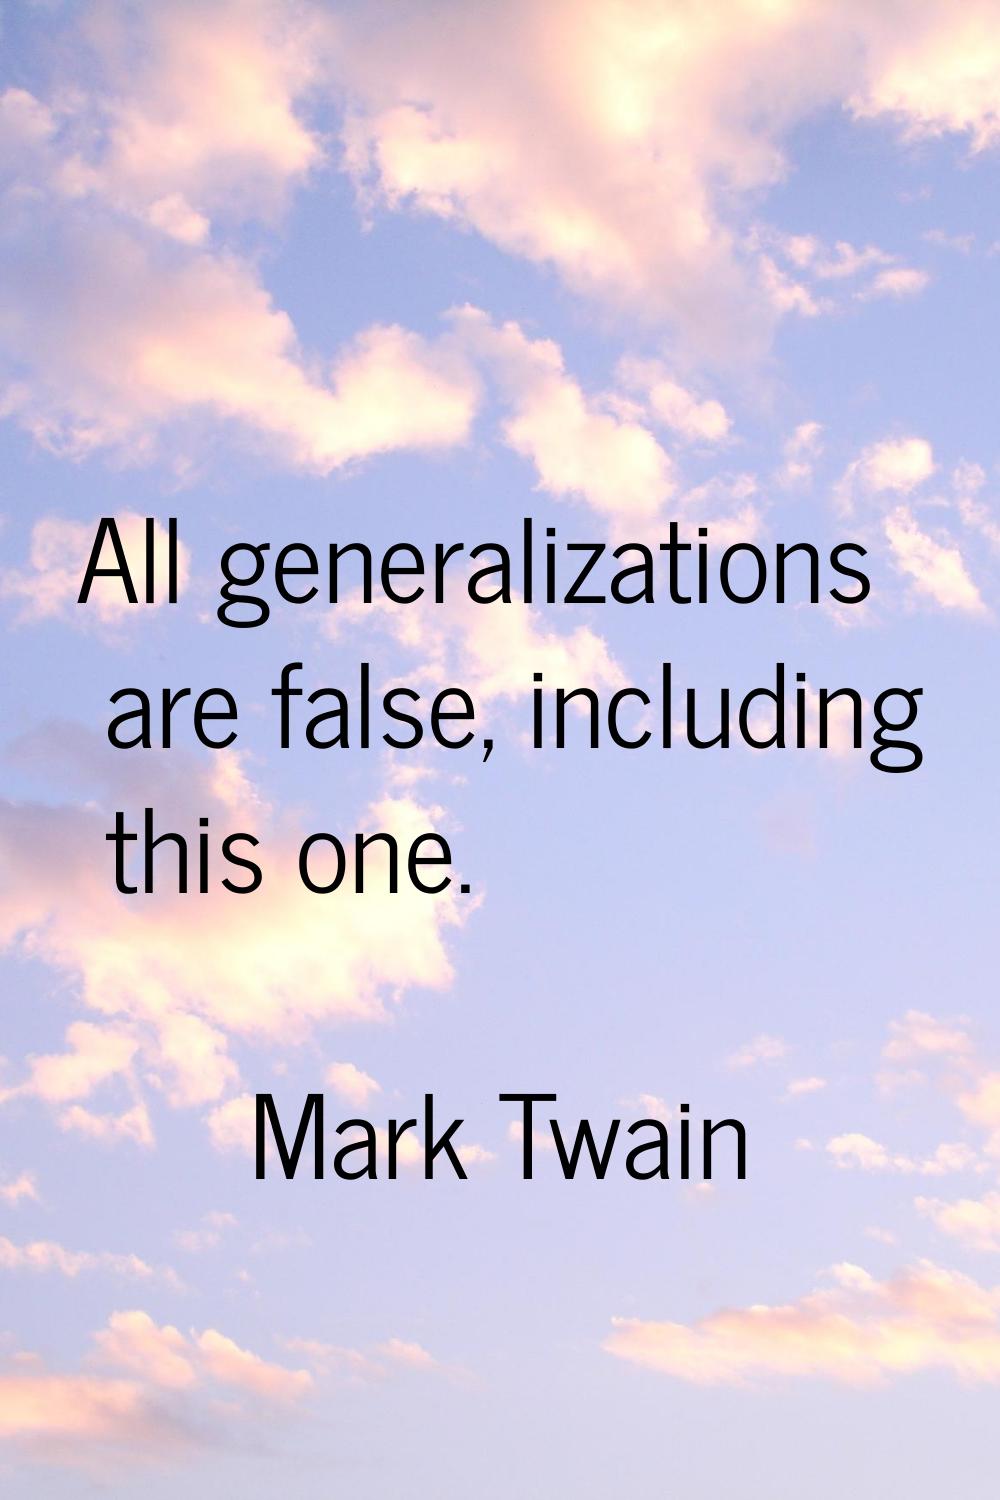 All generalizations are false, including this one.